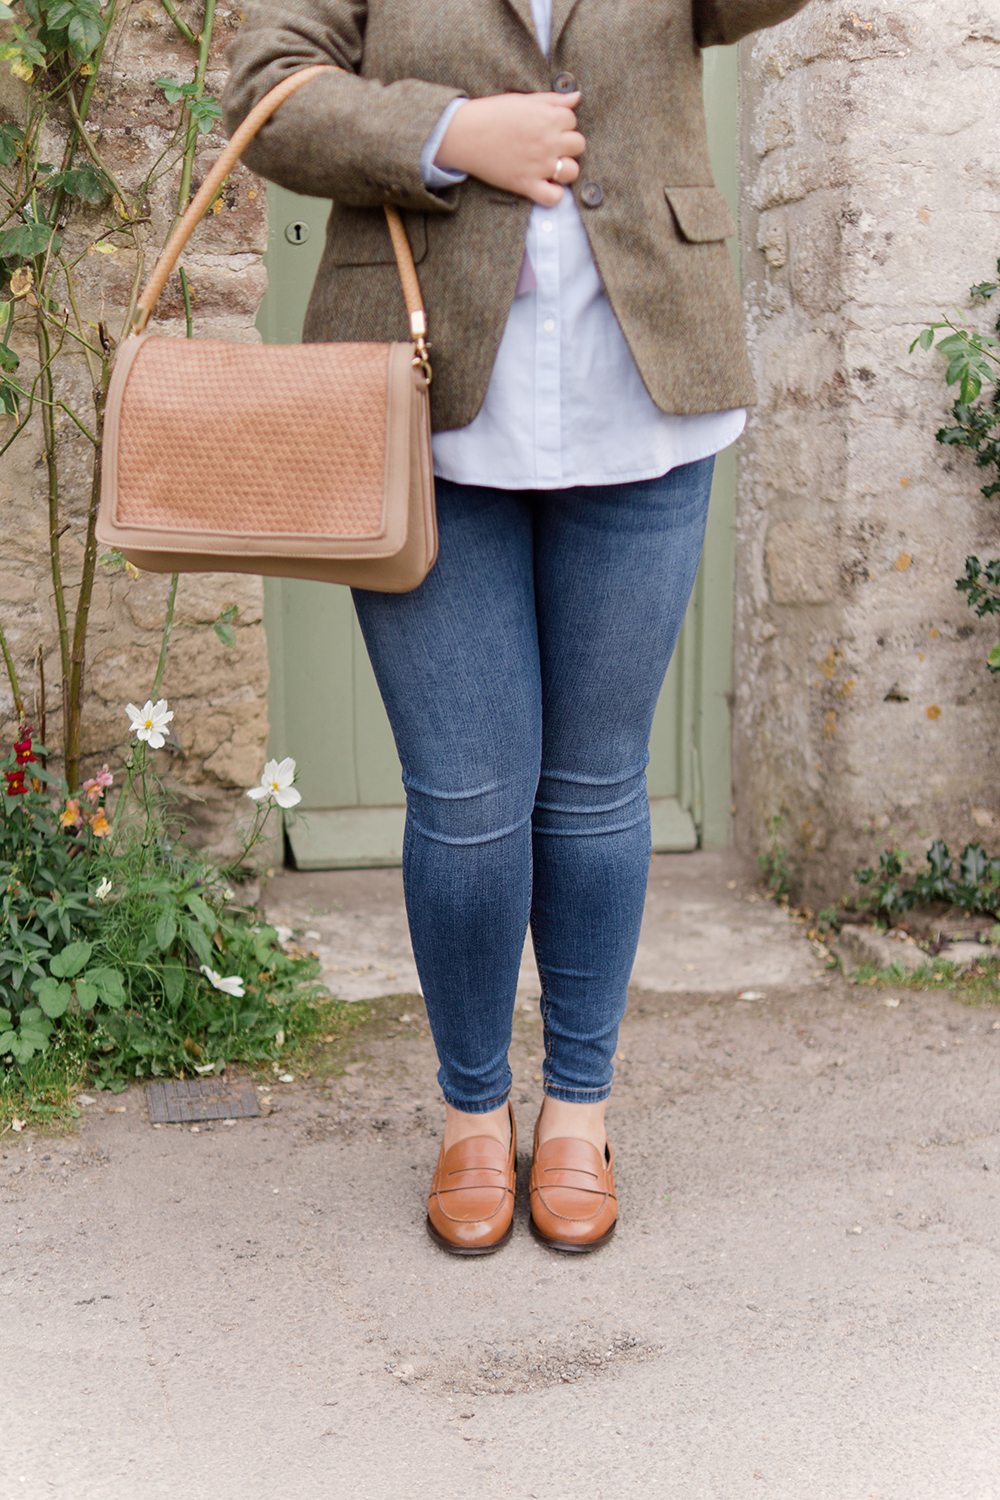 tweed-jacket-loafers-classic-style-ootd-bibury-barely-there-beauty-blog